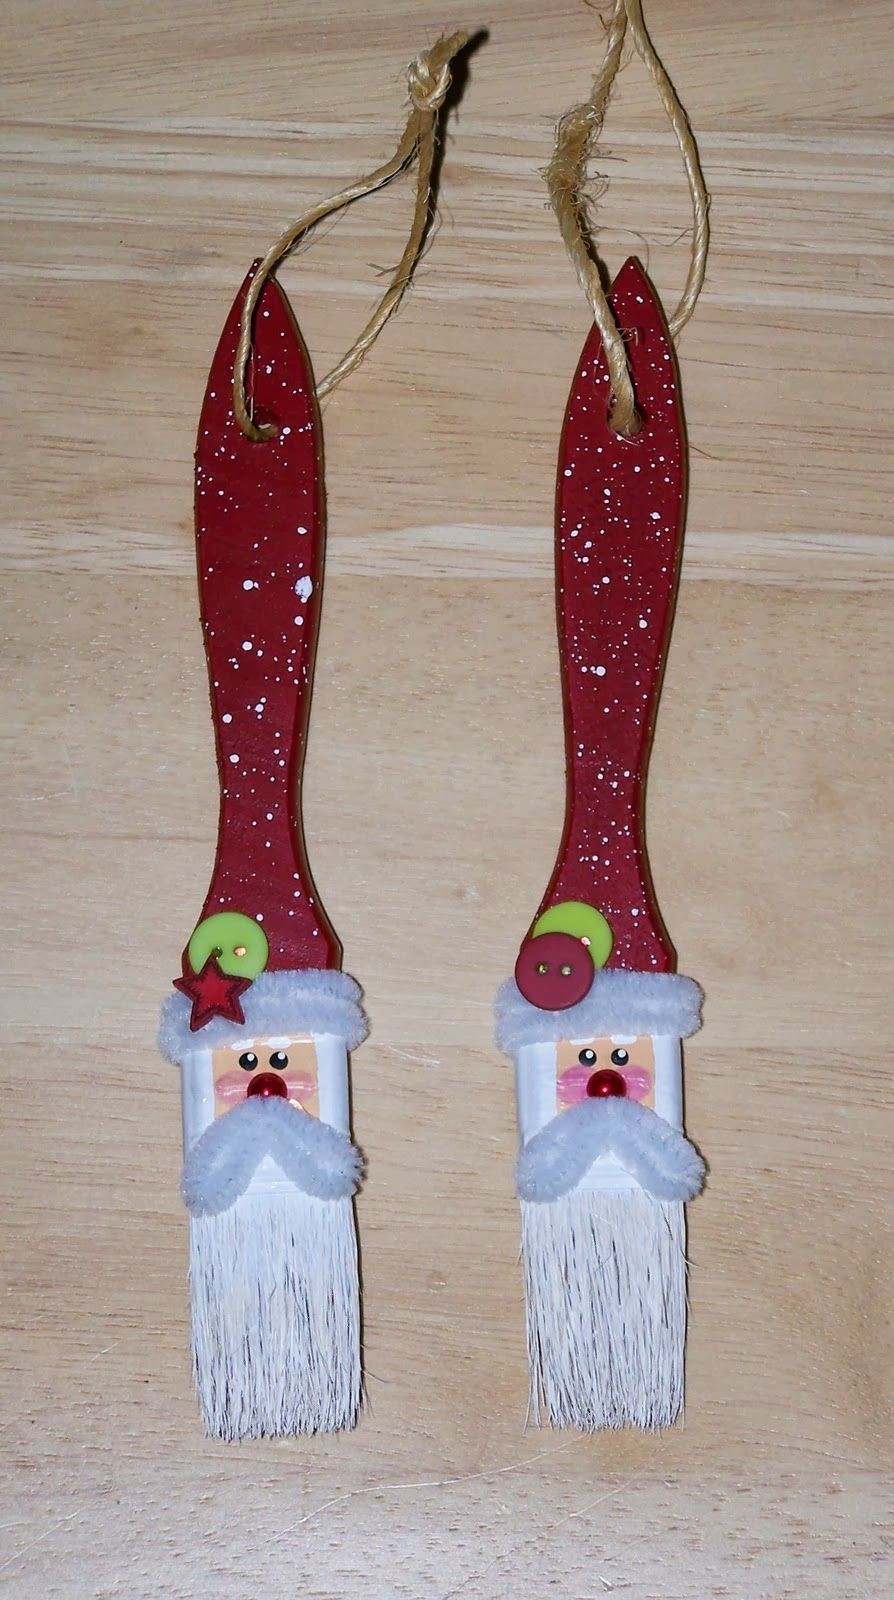 Christmas Crafts To Make And Sell Pinterest
 pinterest christmas crafts to sell Google Search More